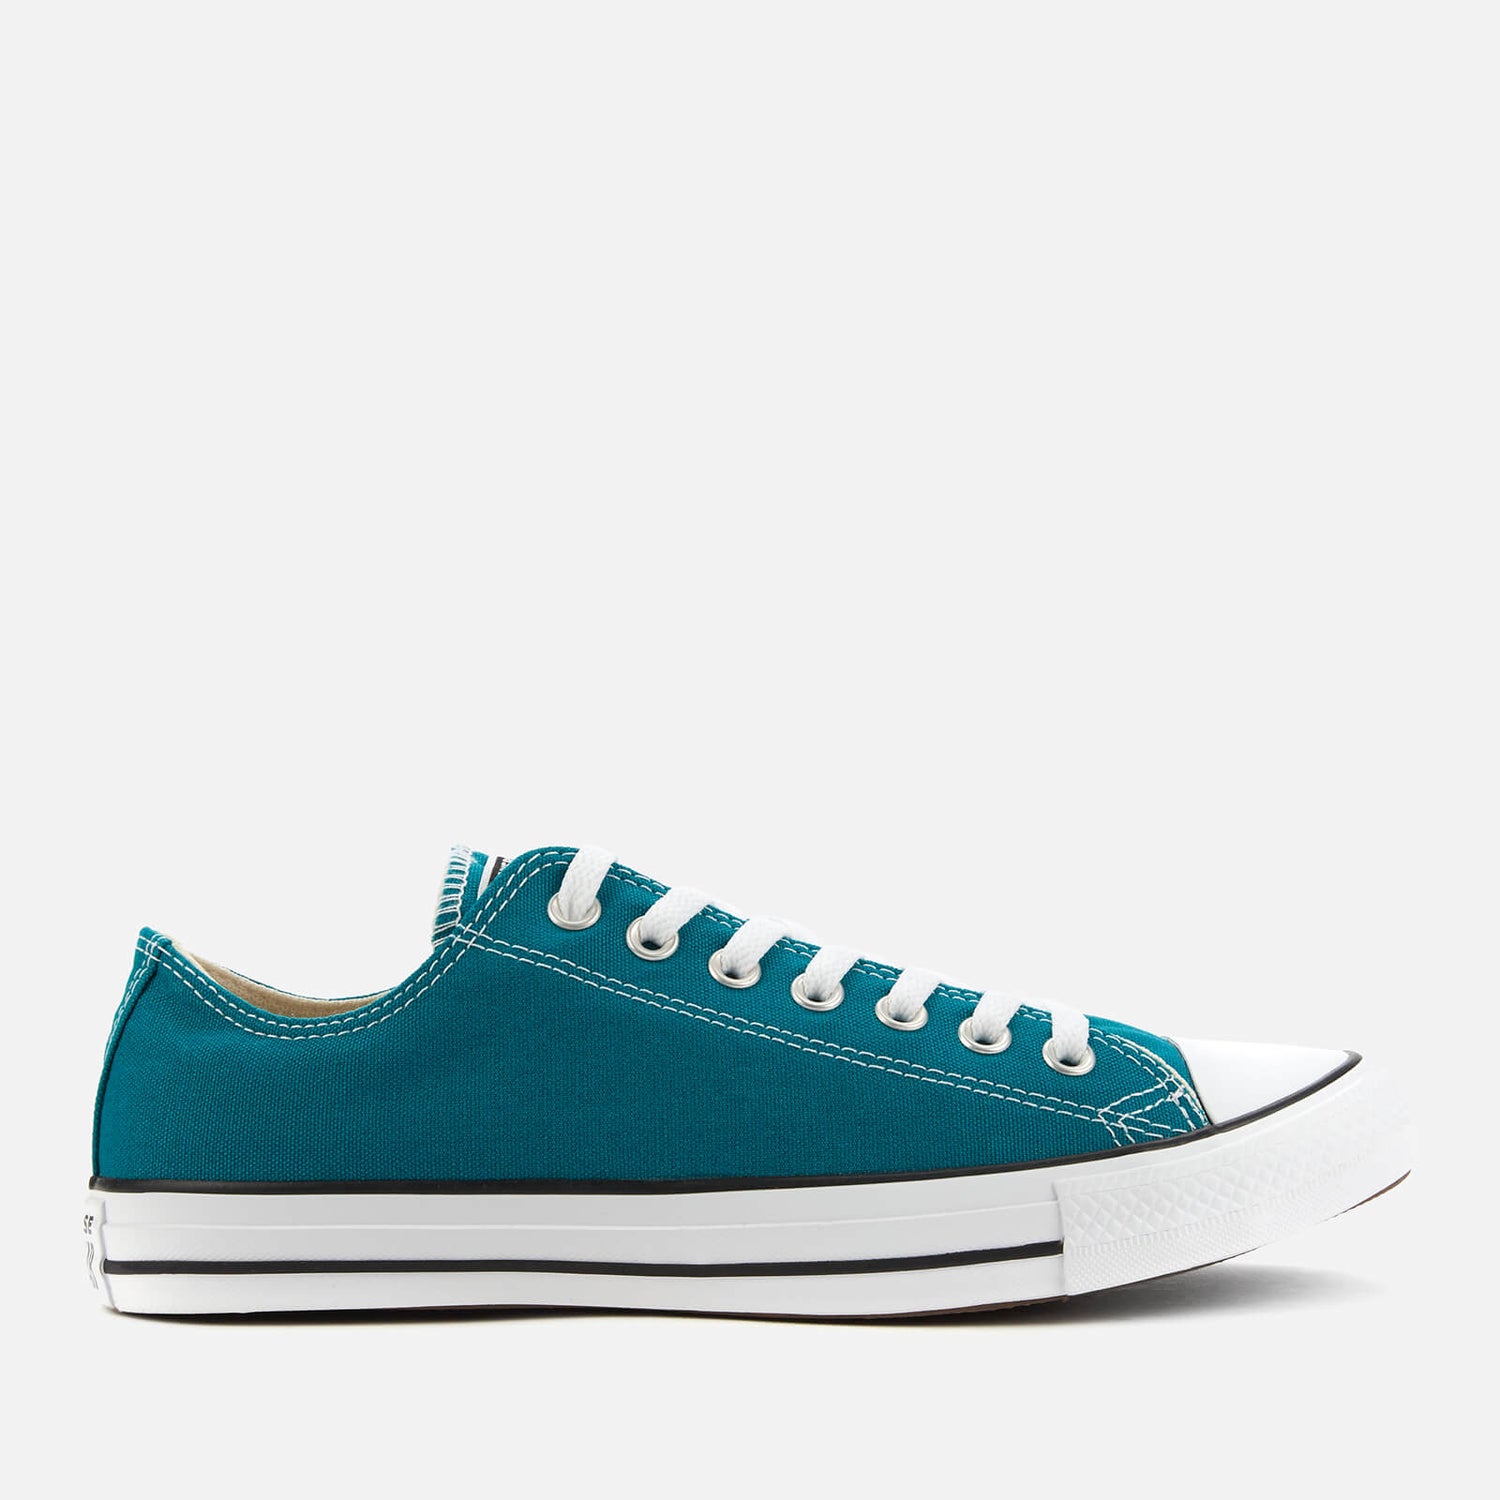 Converse Men's Chuck Taylor All Star Ox Trainers - Bright Spruce